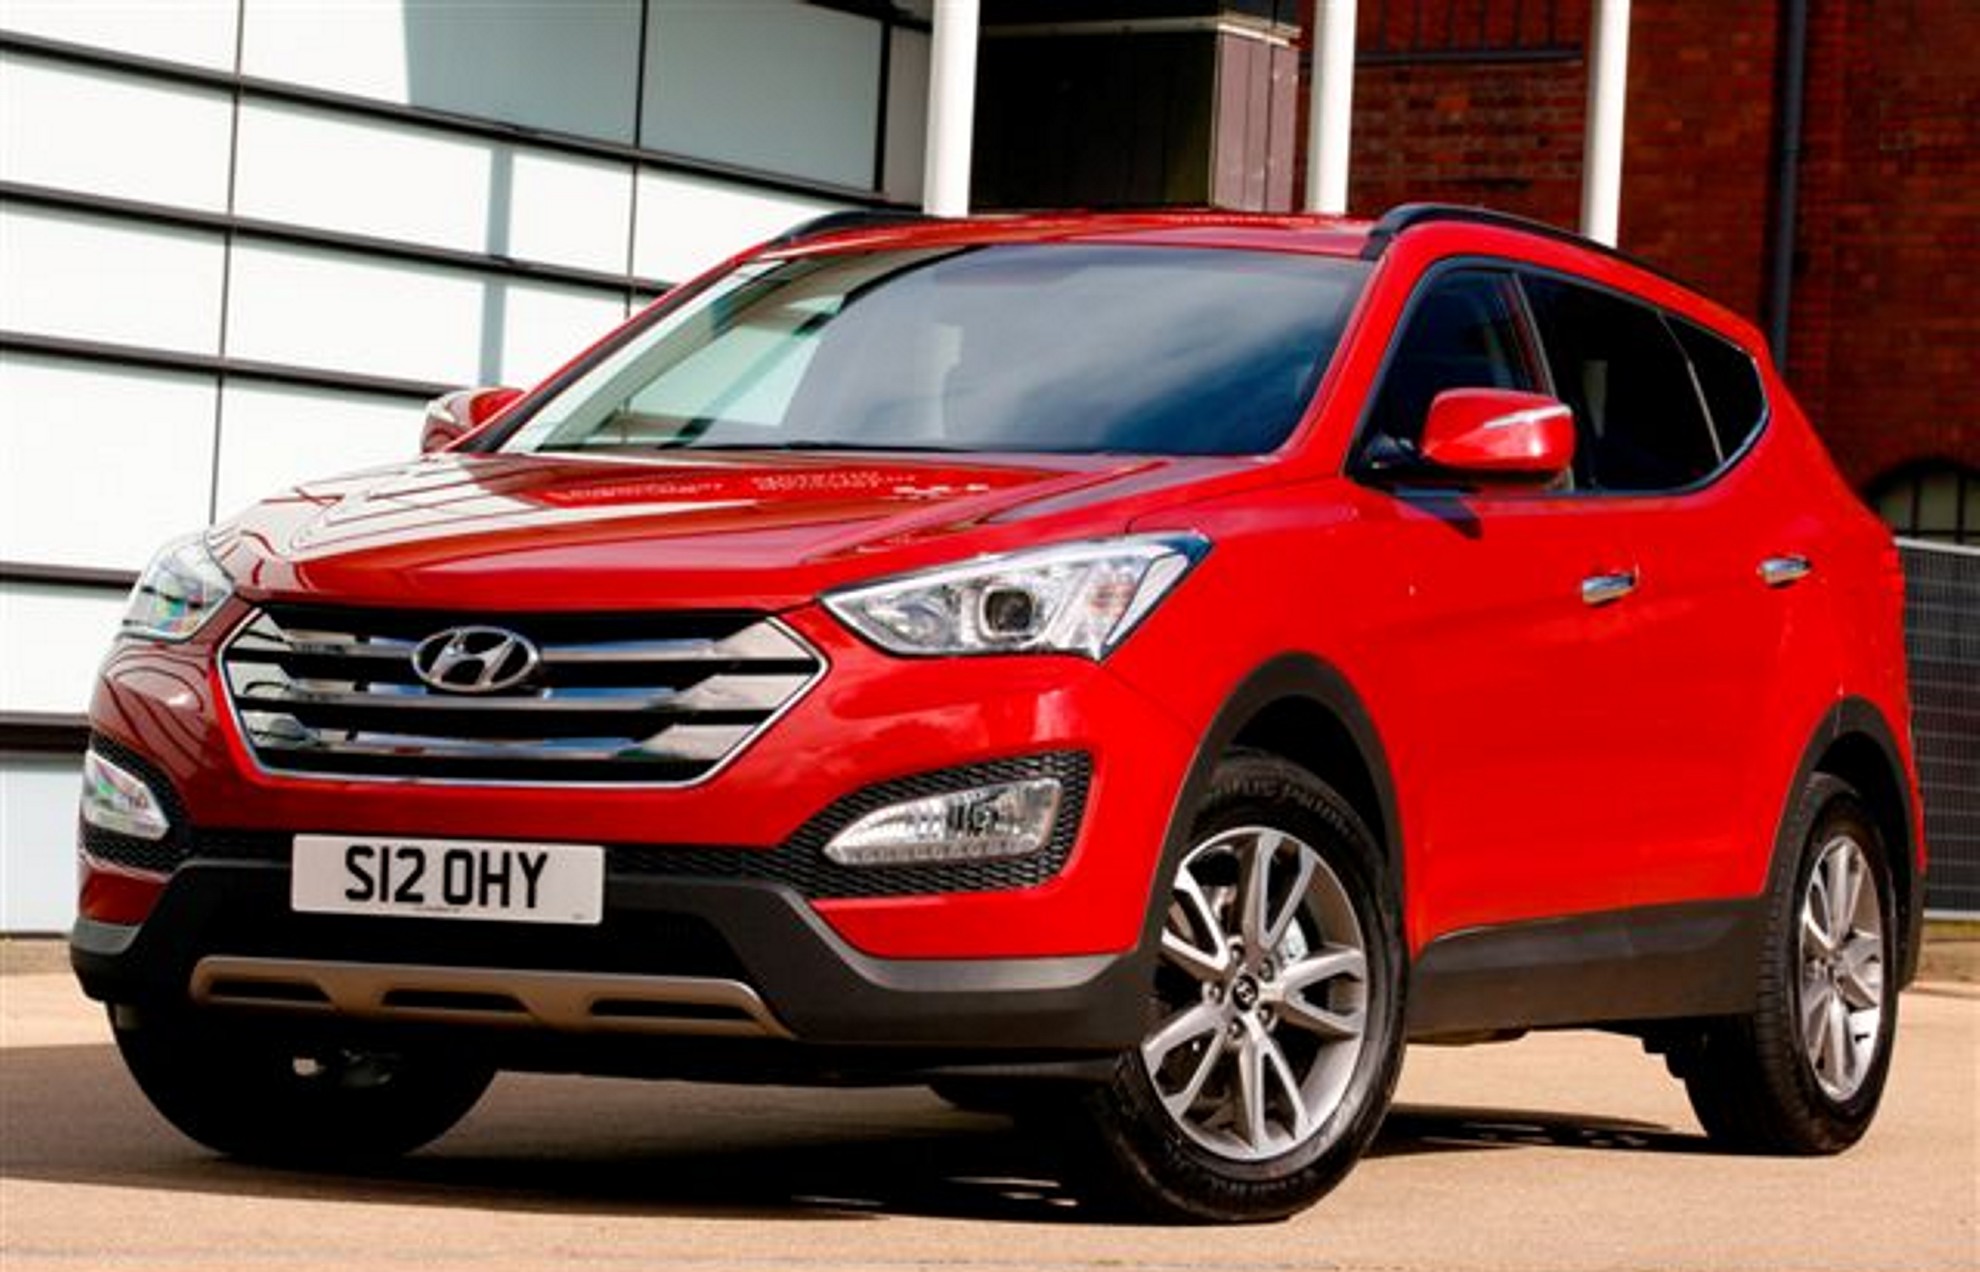 NEW GENERATION SANTA FE NAMED THE SAFEST IN ITS CLASS OF 2012